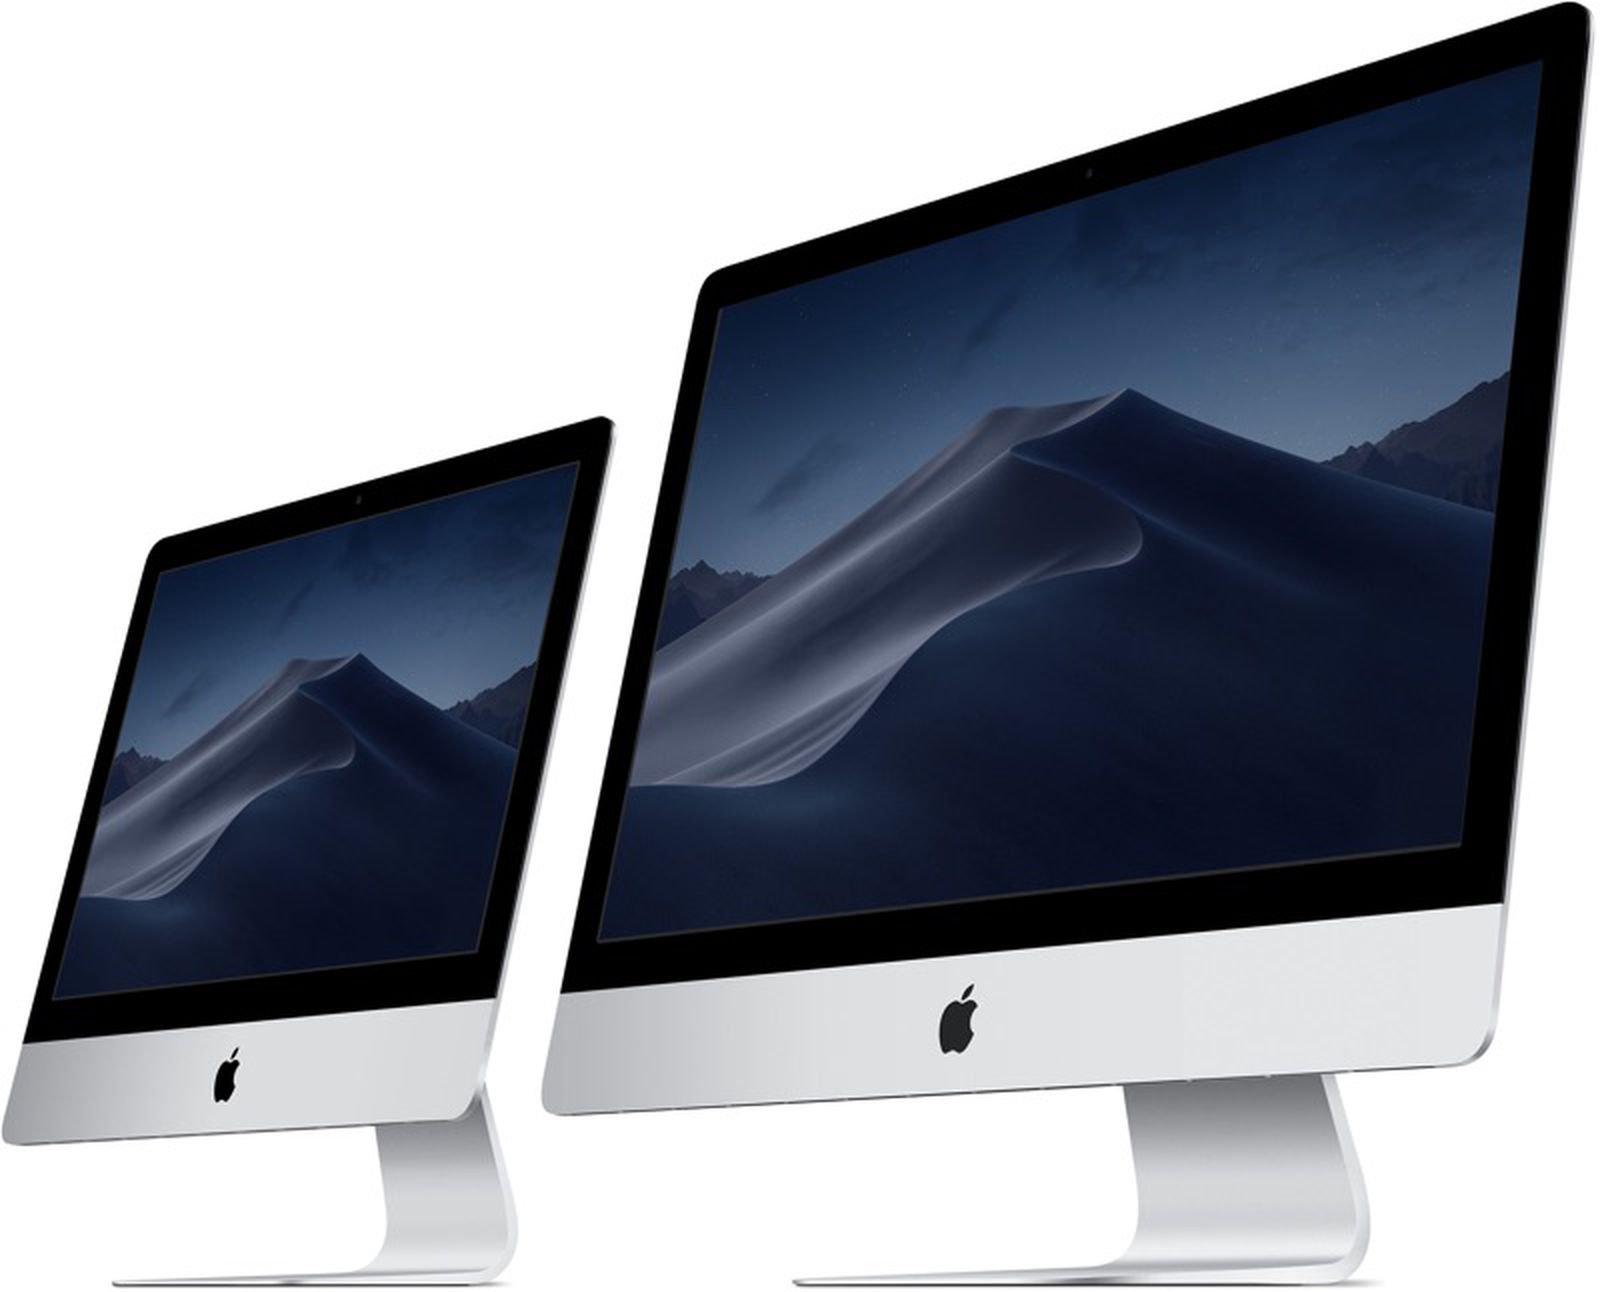 Previously Reliable Leaker Coinx Suggests New Imac And Mac Mini